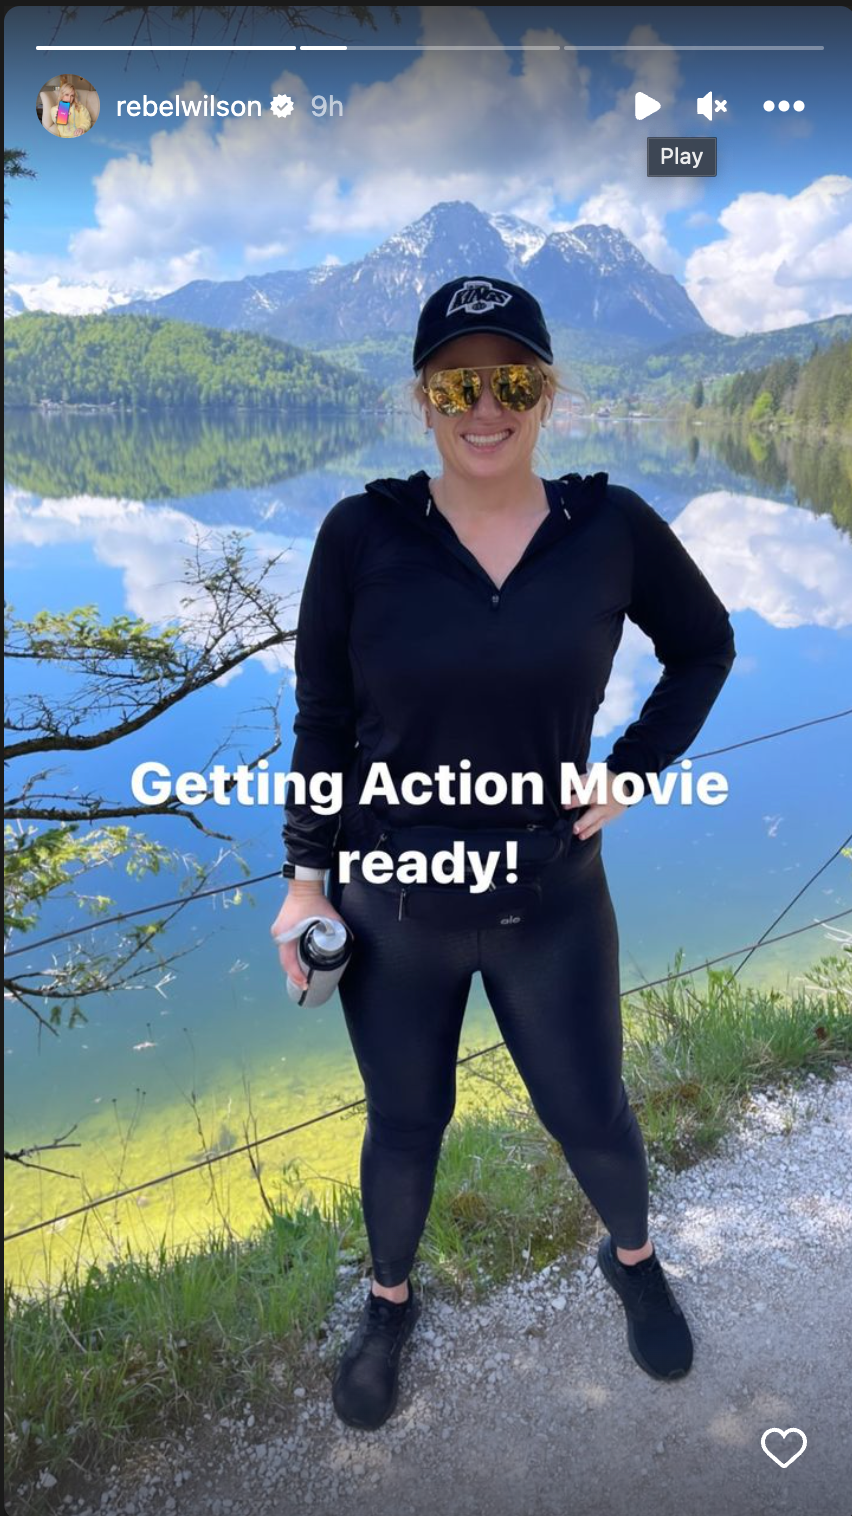 Rebel Wilson is action movie ready